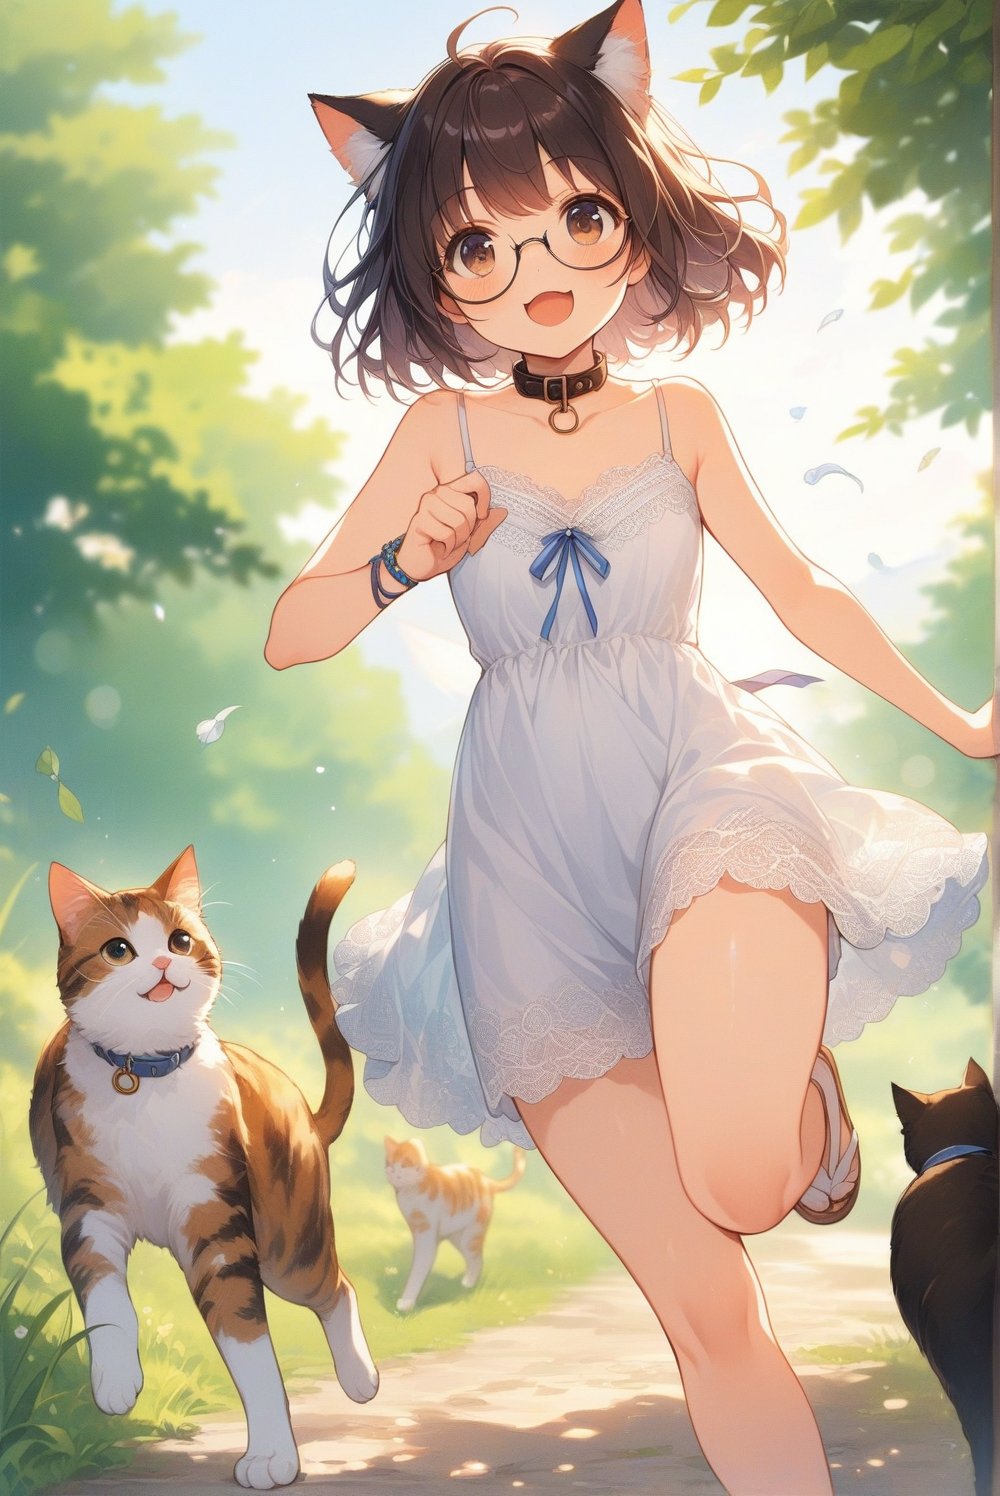 beautiful details, uniform 8K wallpaper, high resolution, exquisite texture in every detail,  beautiful illustration,manga touch

1girl, ((high school-age girl)), shyness,
summer, japanese countryside, in lakeside,
white Summer-like camisole dress , blue line ribbon, lots of lace,

((nekomimi)),Cat ears the same color as her hair,
short hair, open mouth, (glasses), round eyes, cat collar, , black hair, smile, :3,

running,
in the park, play with cats,
frying,  jumping, fluttering in the wind,

shot angle is slightly tilted, adding dynamic movement to the shot, shot from side and below,
, looking at another, look away,

nekomimimeganekao